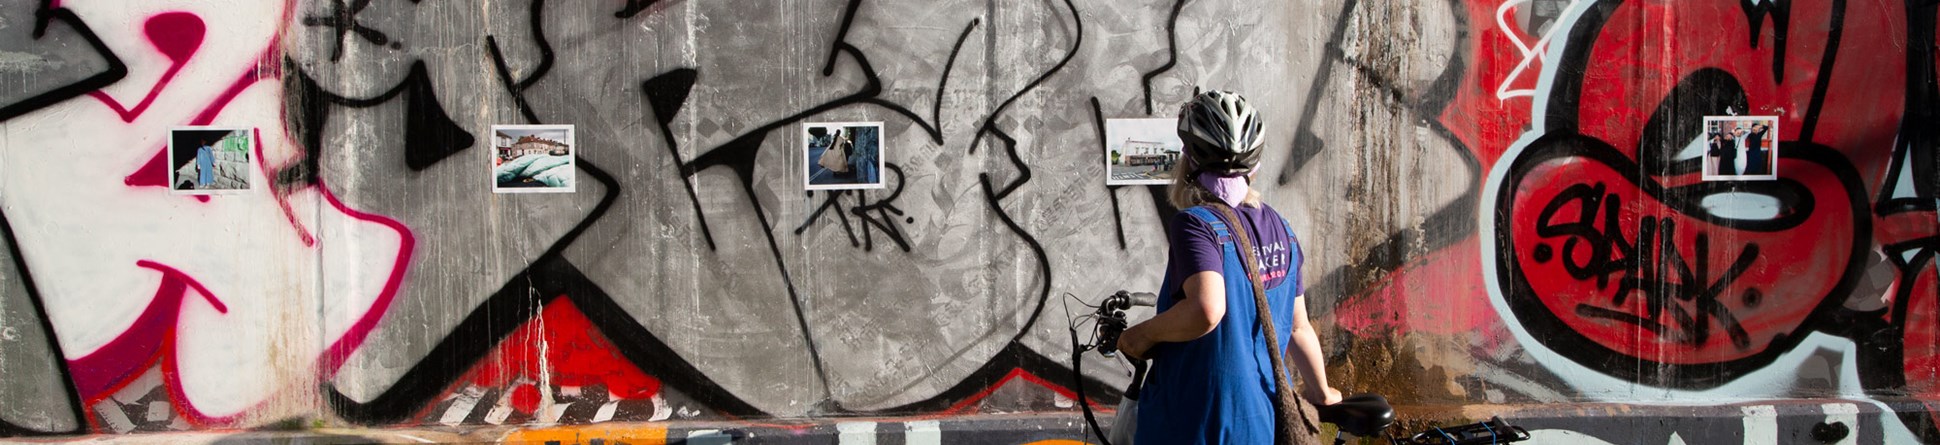 Person standing with bike in front of postcard size photographs mounted on a concrete graffiti wall.